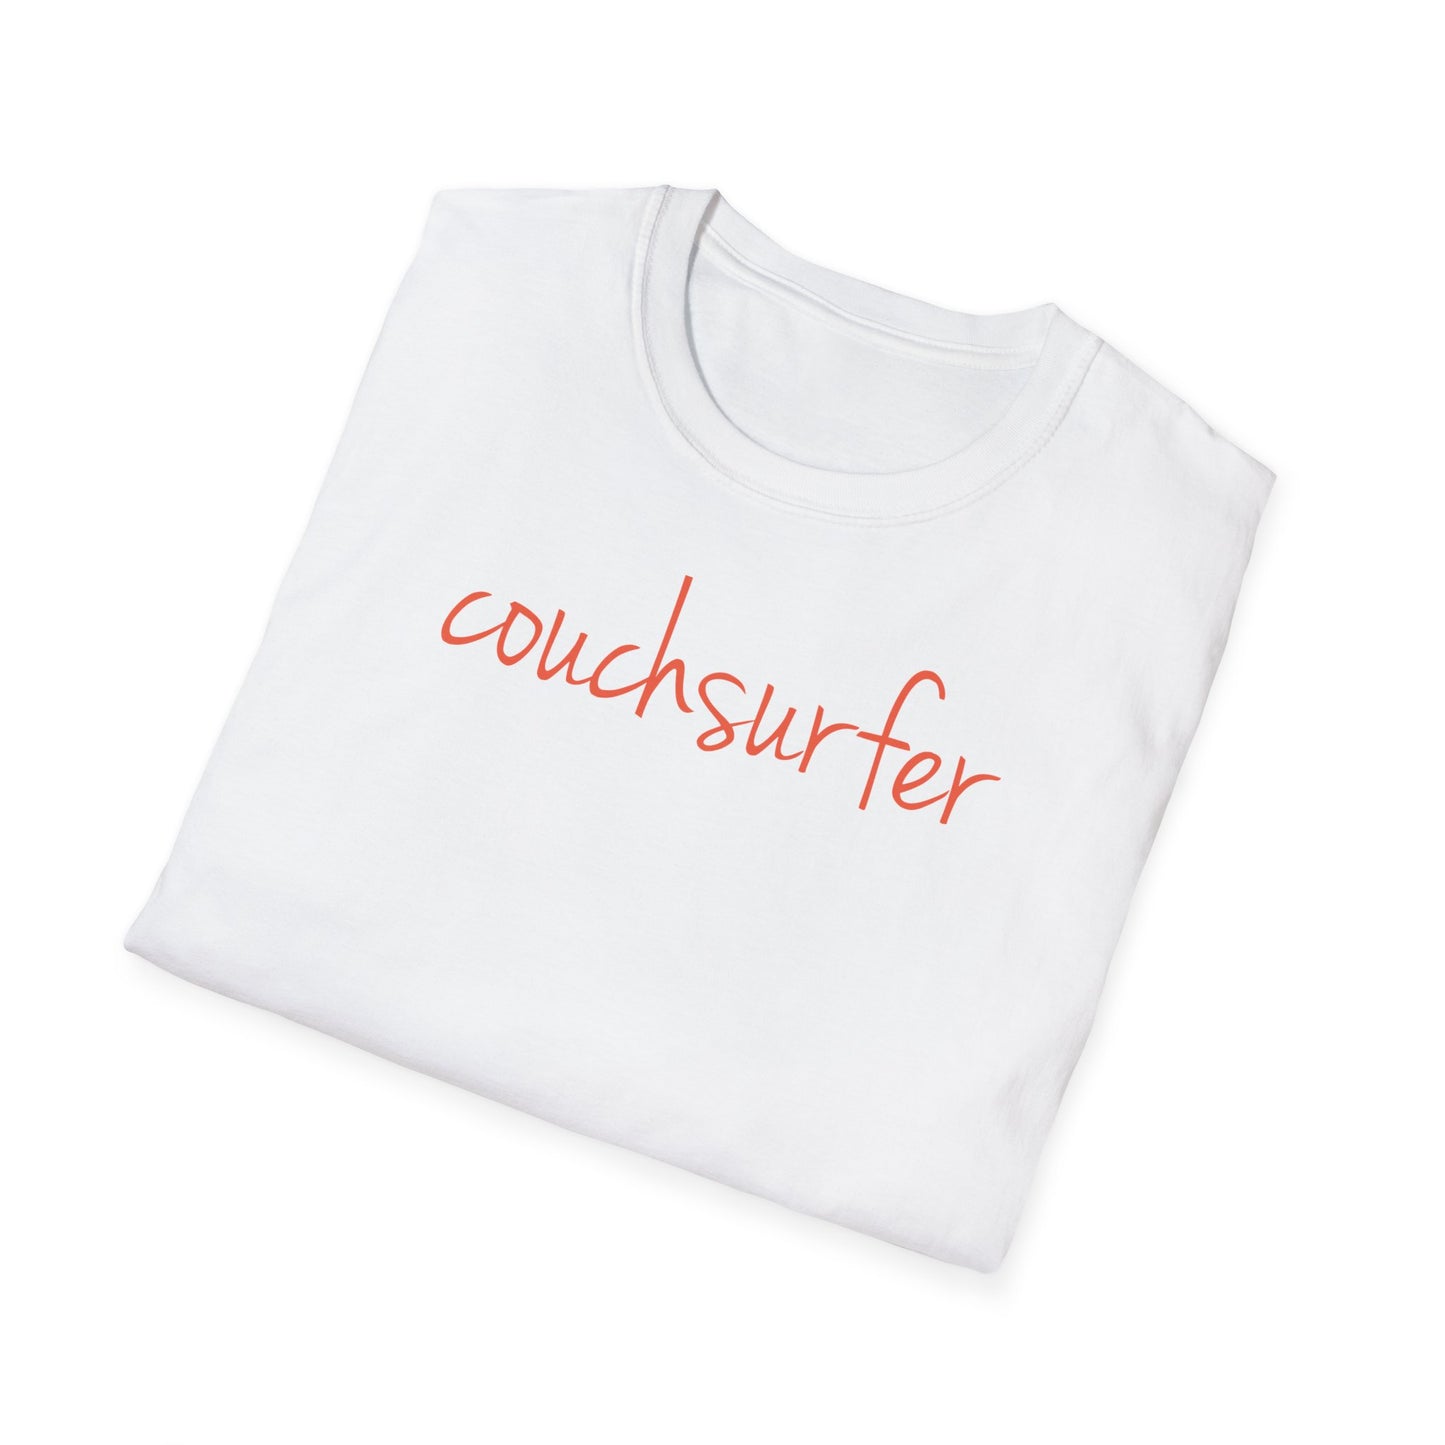 The Couchsurfer Tee